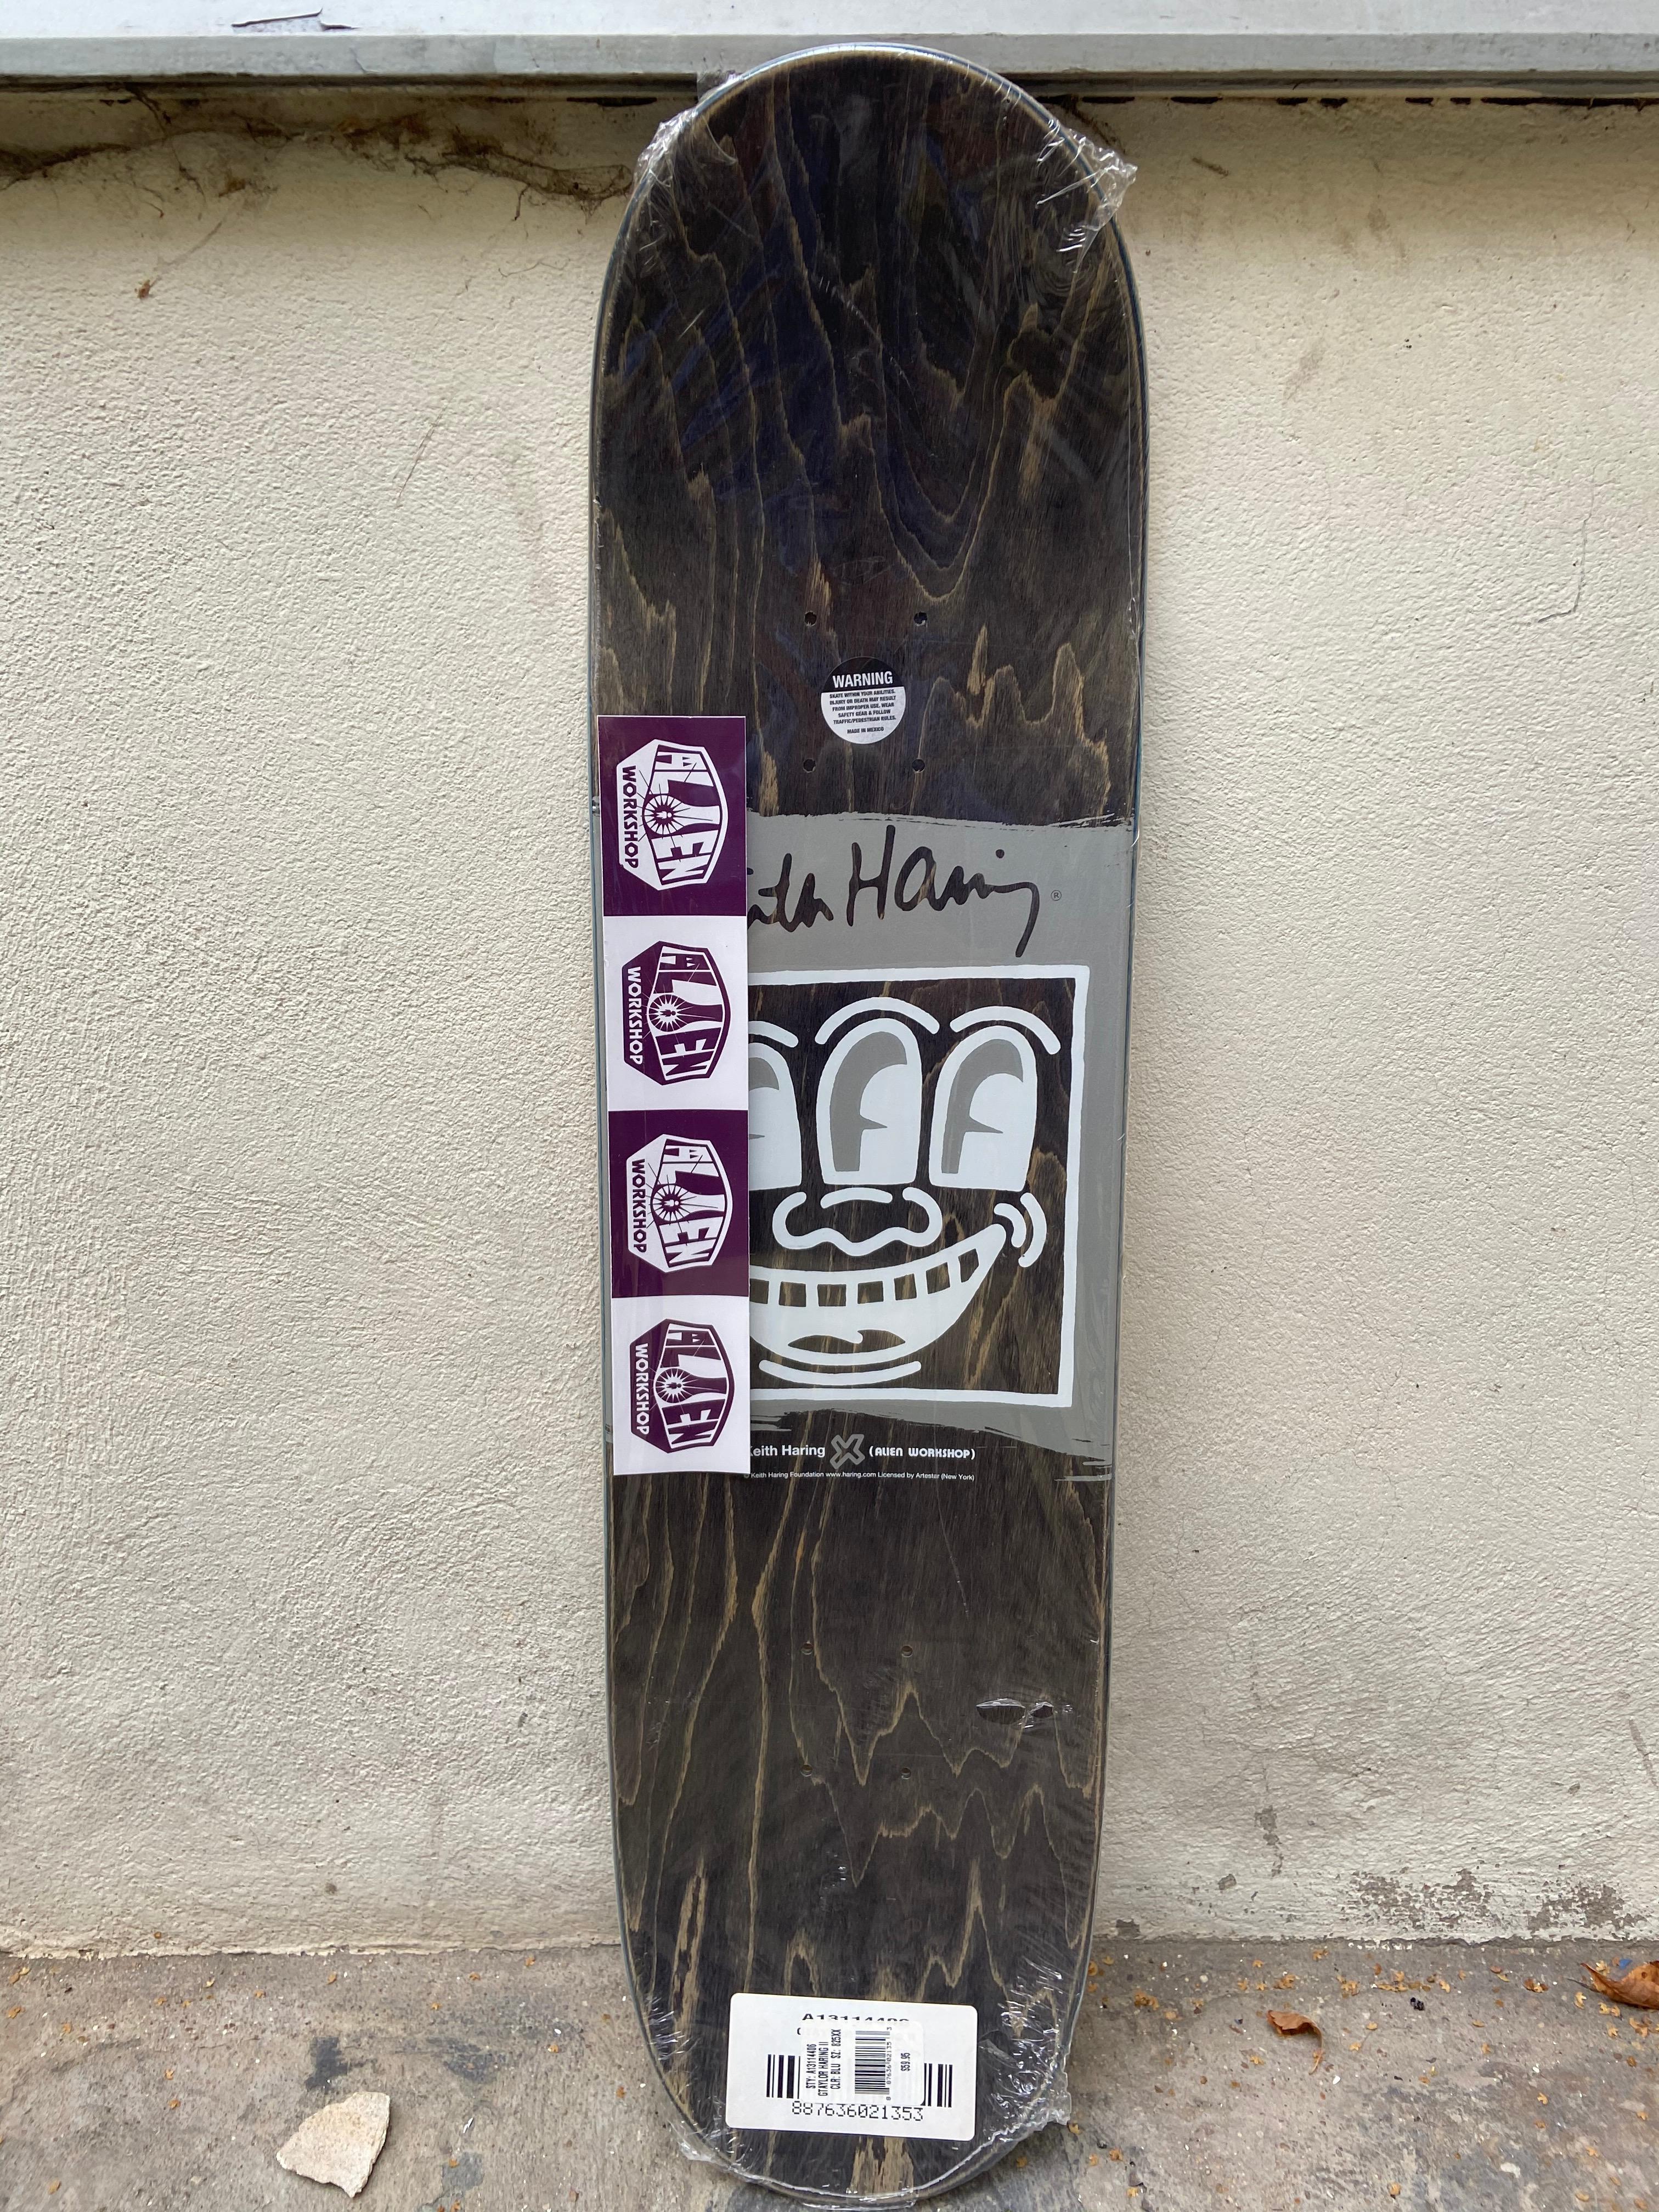 Keith Haring - MIKEY
Skate board Collector
Published by Alien workshop
circa 2008
Front and back decoration 
80.5 x 20.5 - size 825 XX 
Condition : New 
390 euros.